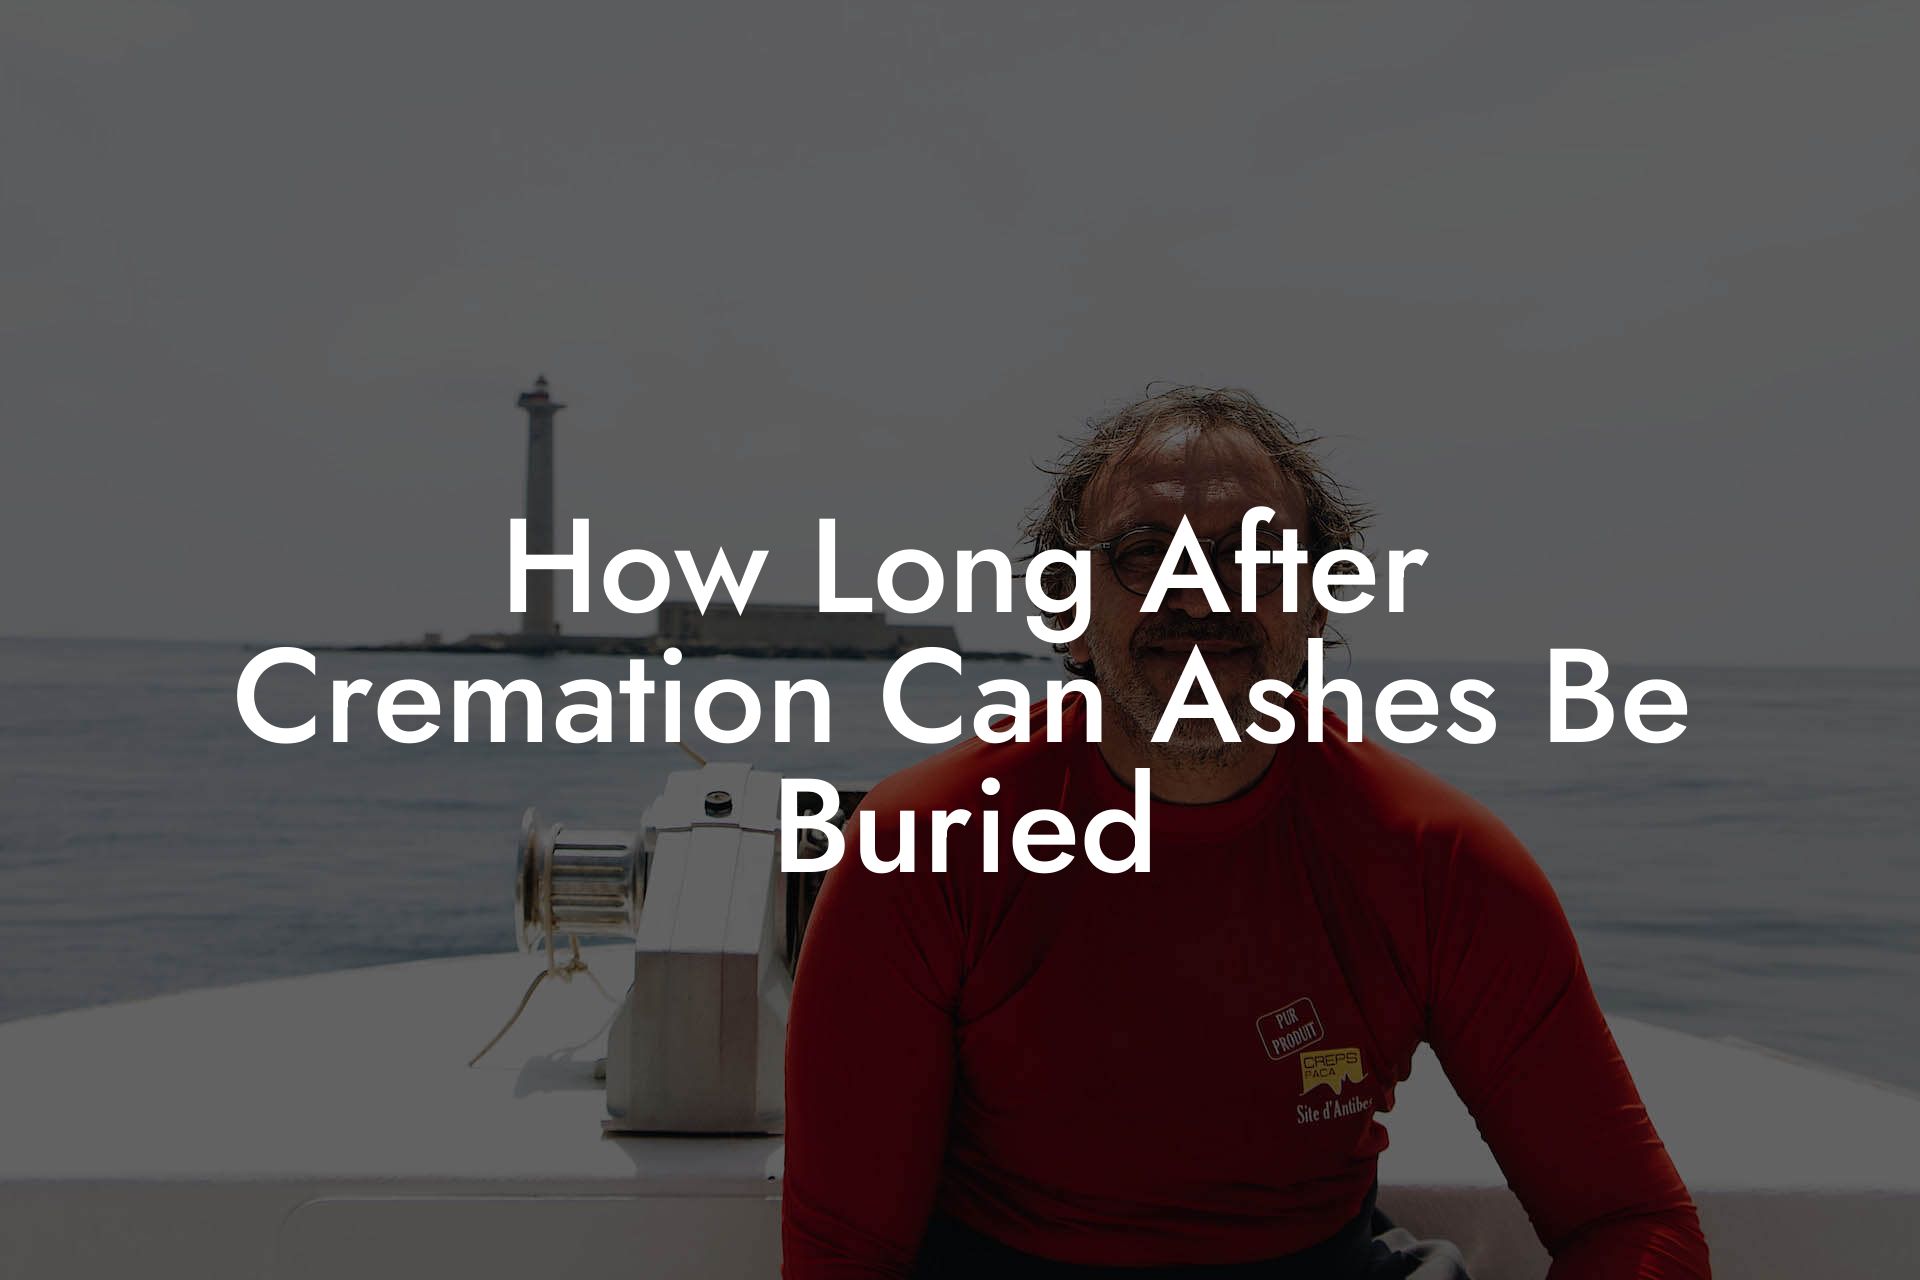 How Long After Cremation Can Ashes Be Buried